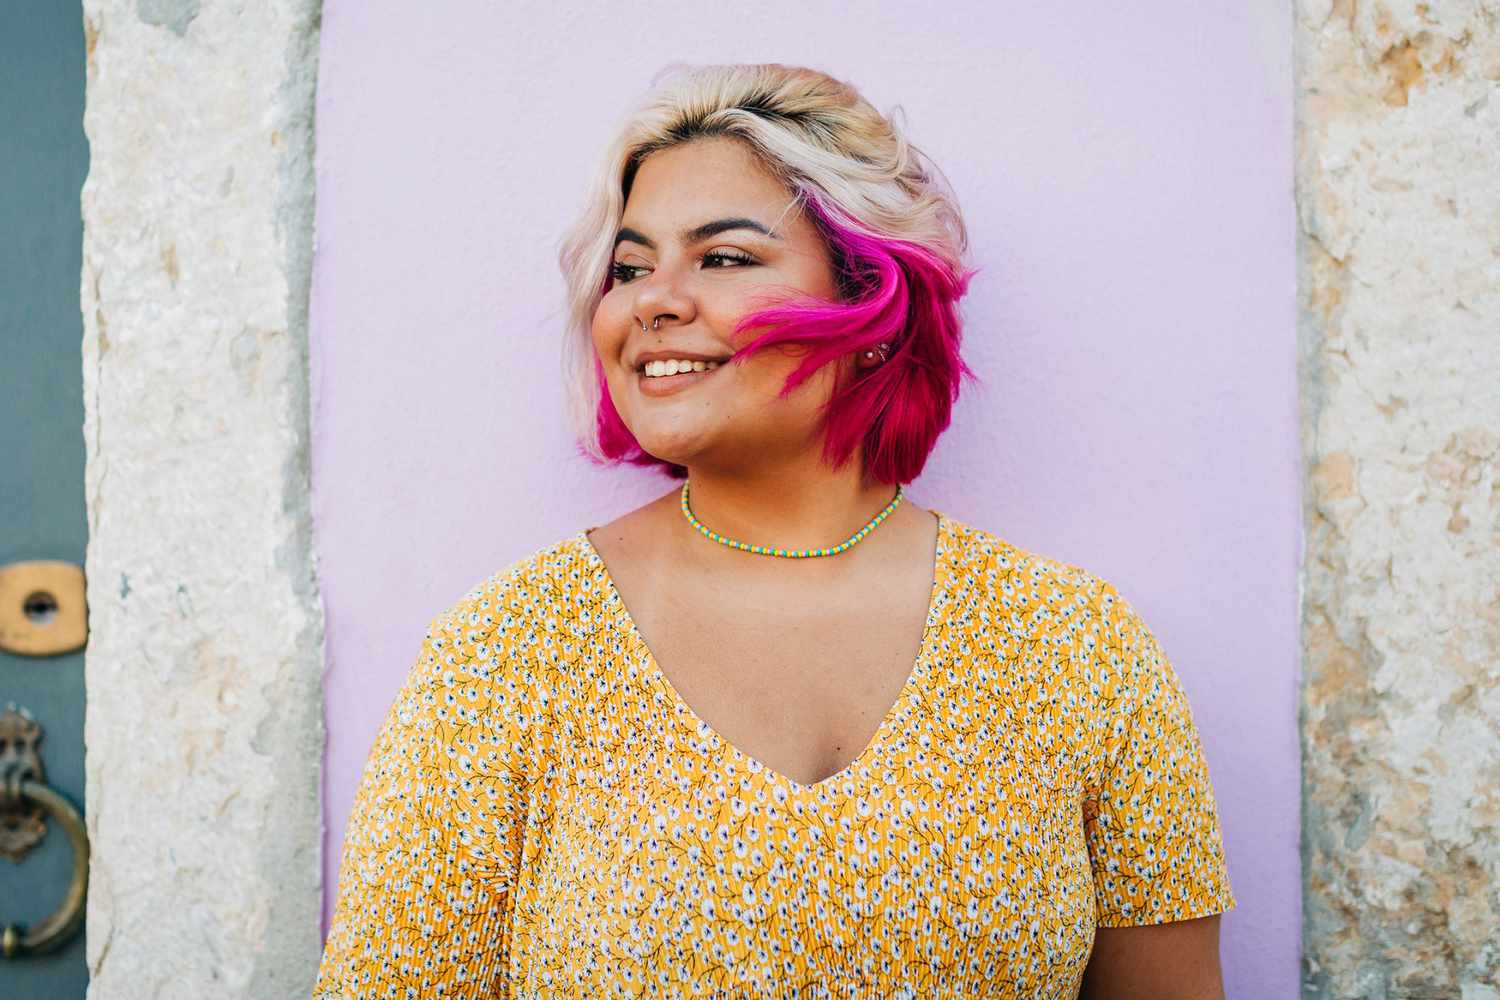 A woman with dyed hair smiling